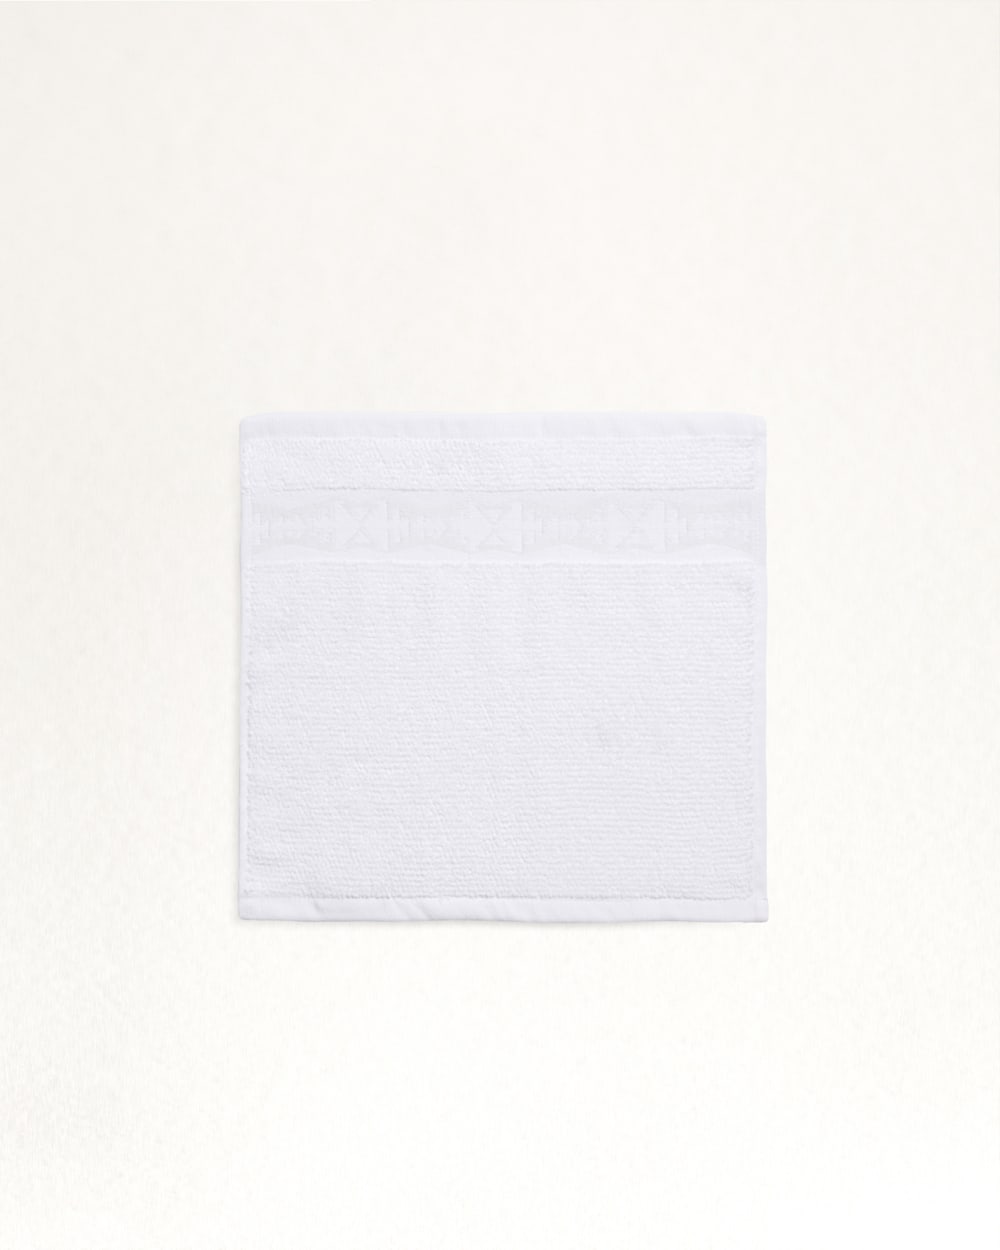 ALTERNATE VIEW OF LOS LUNAS TONAL TOWEL COLLECTION IN BRIGHT WHITE image number 4